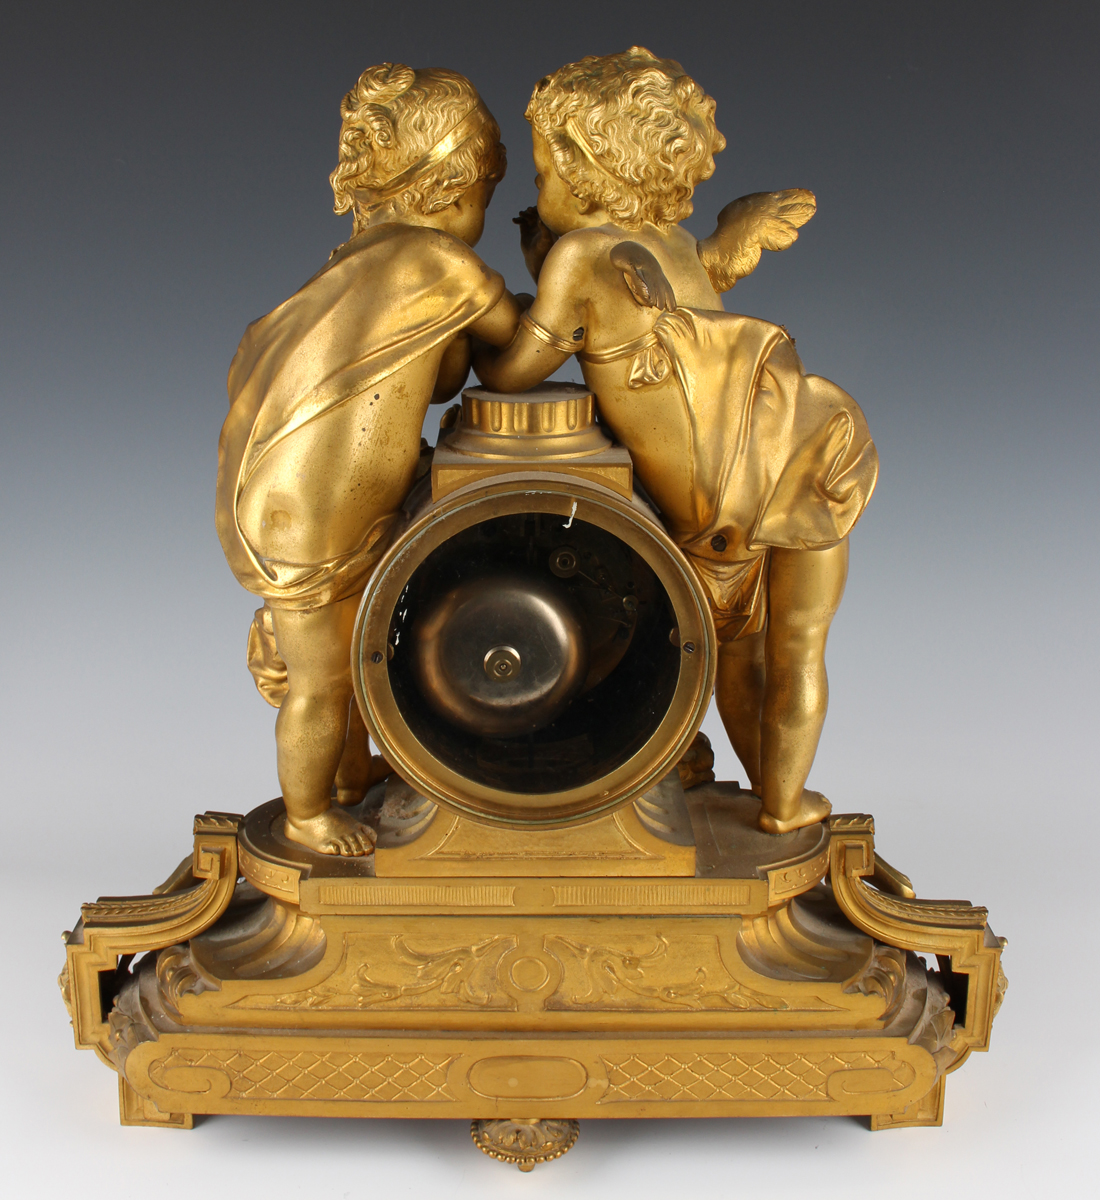 A late 19th century French ormolu mantel clock with eight day movement striking on a bell, the - Image 4 of 9